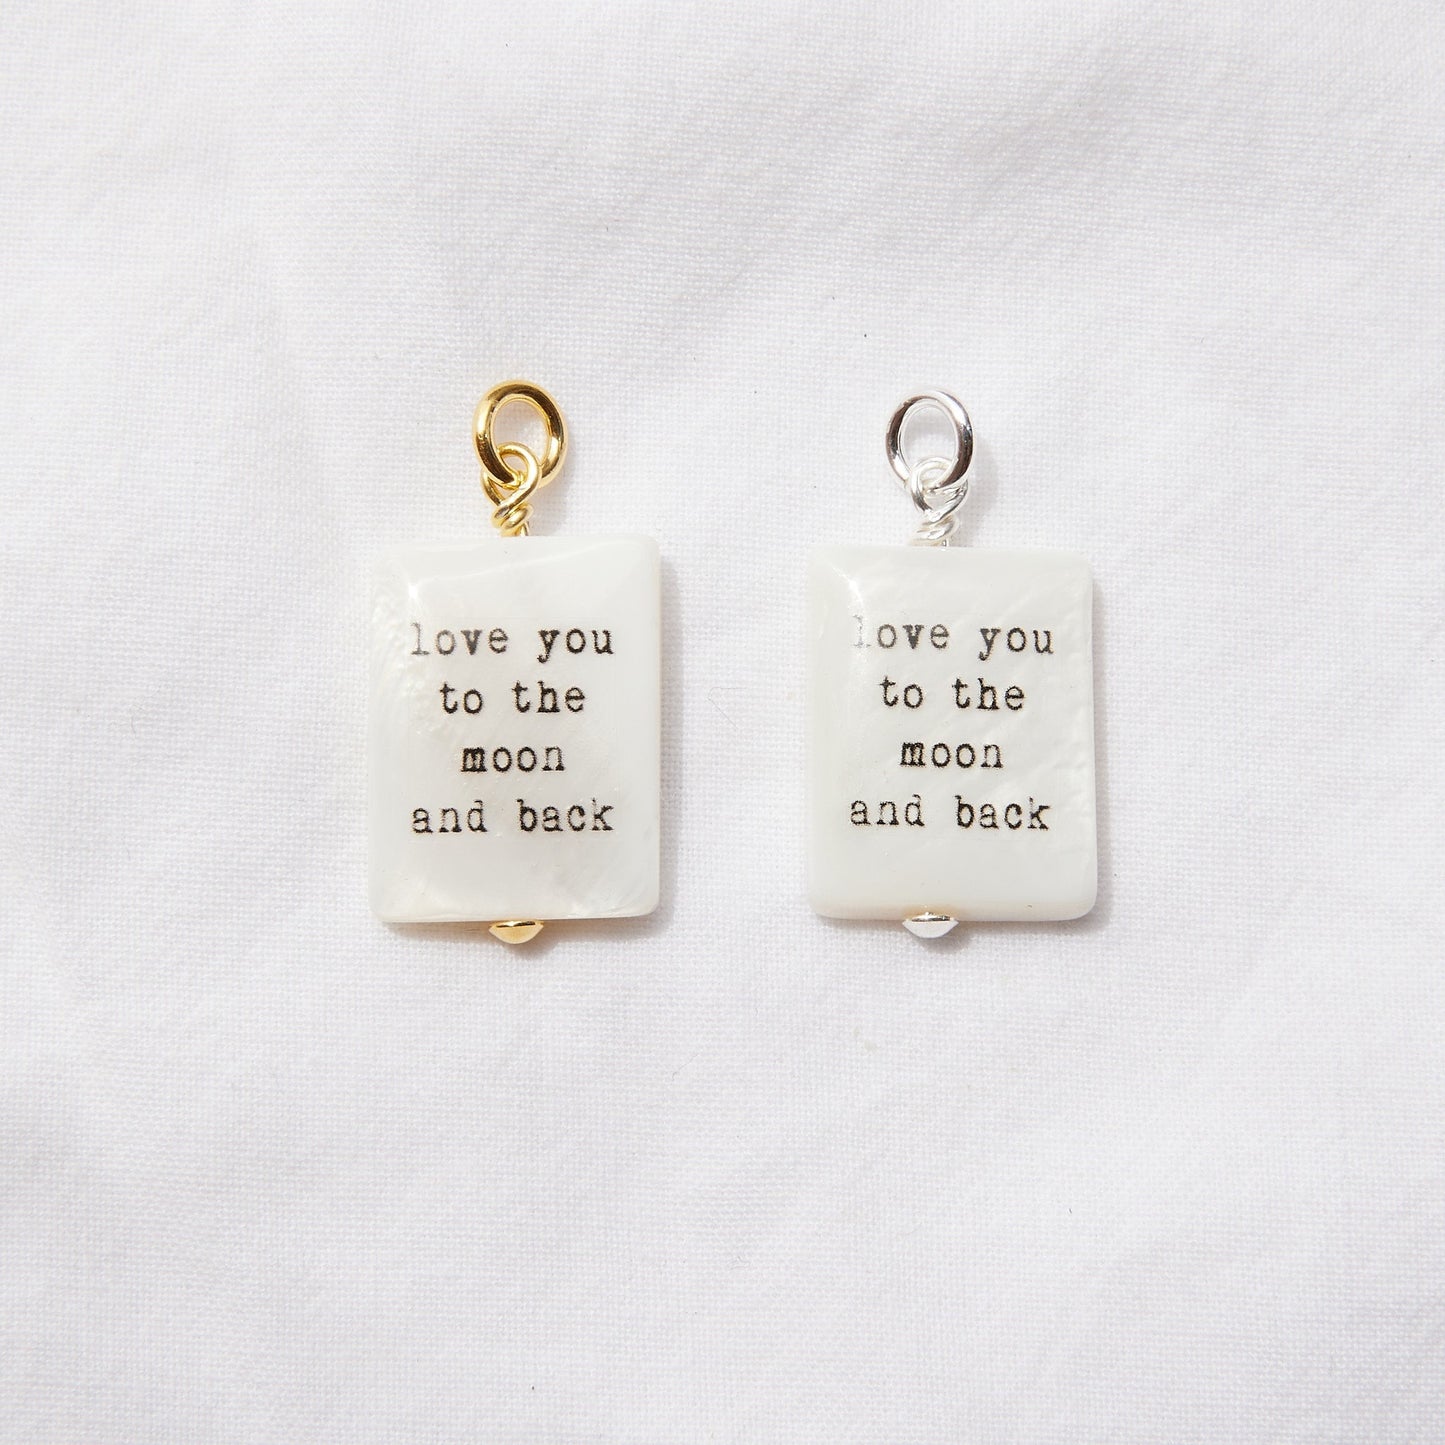 Love you to the moon and back Pendant